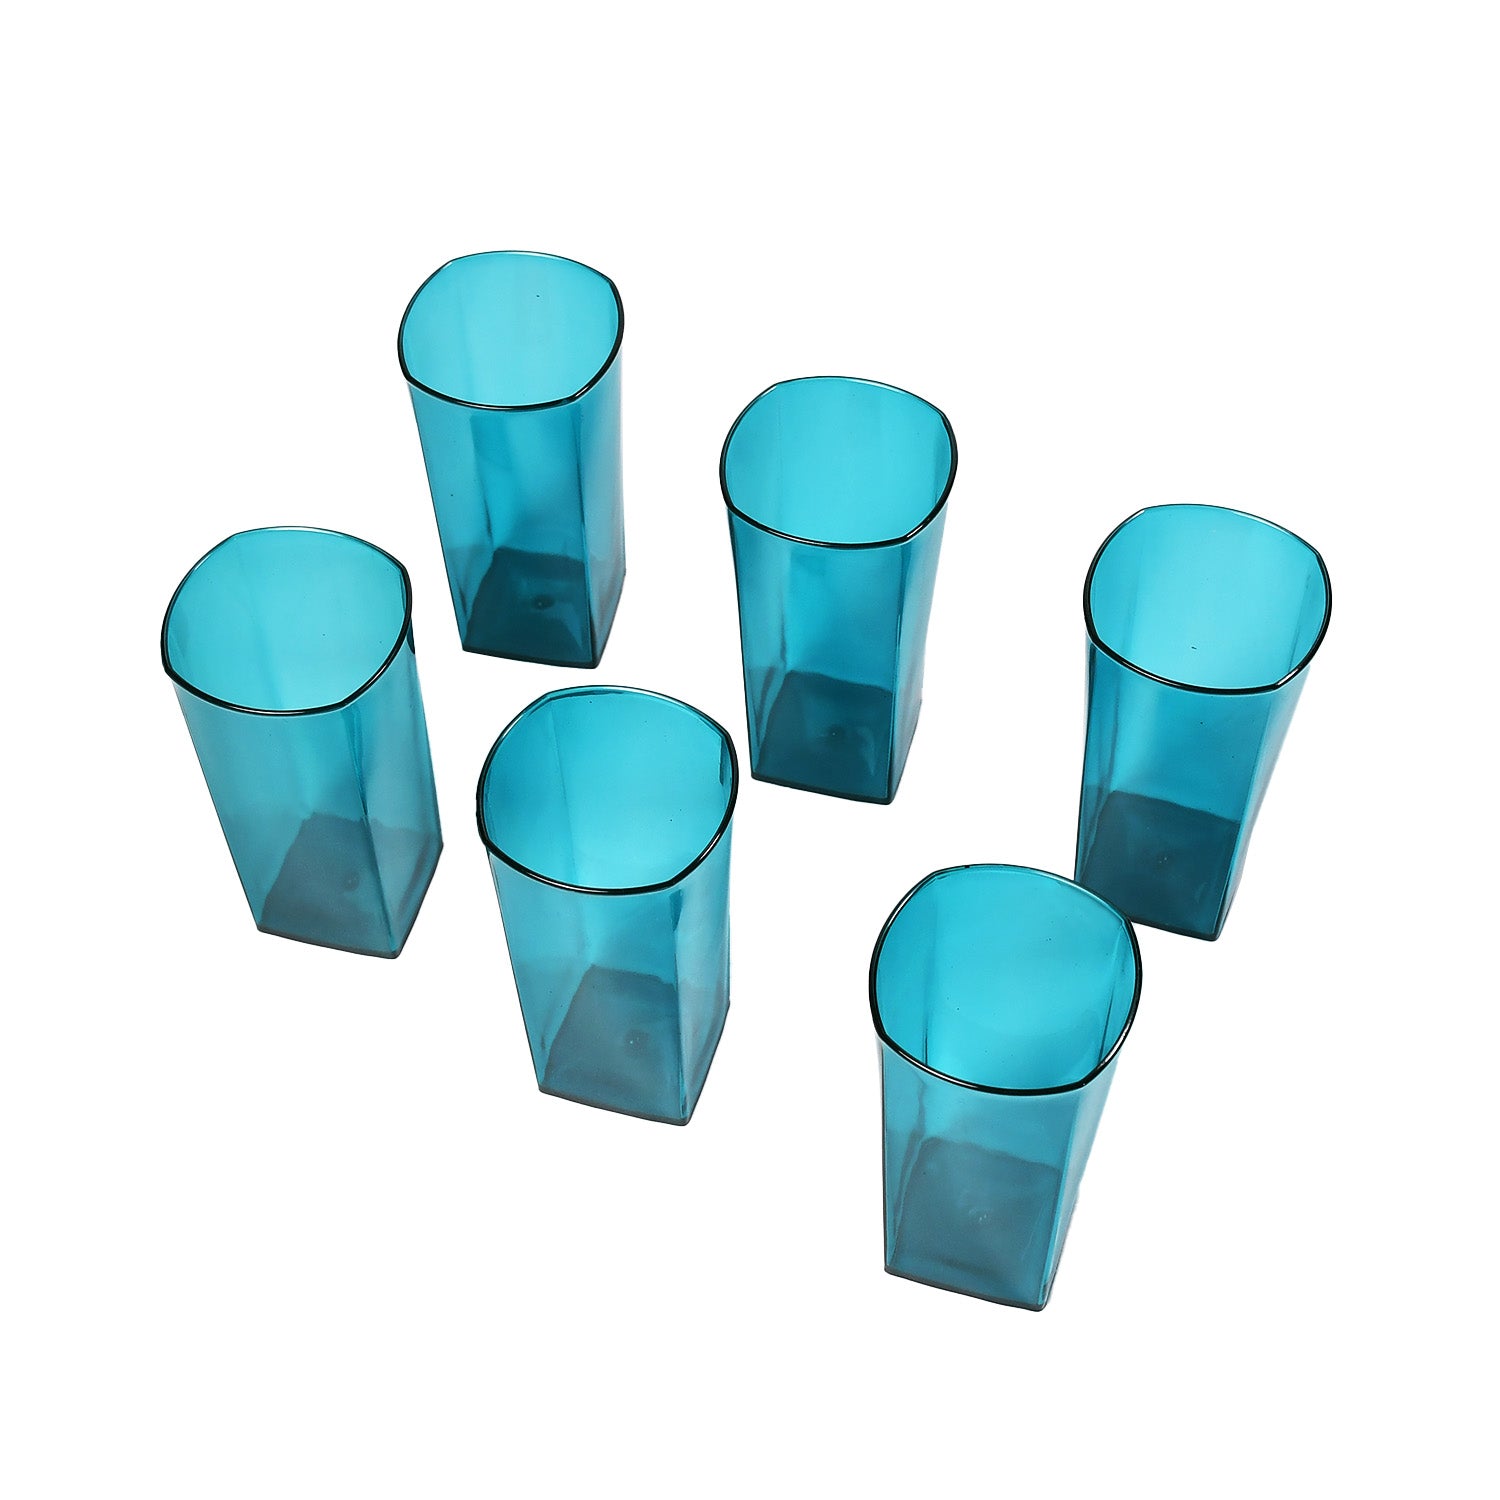 2353 Premium Juice and Water Glasses Set of 6 Transparent, 300ml, Drinking Water Glasses Stylish & Crystal Square Highball Glasses for Water, Juice & Cocktails, Glass Set of 6 for Water DeoDap